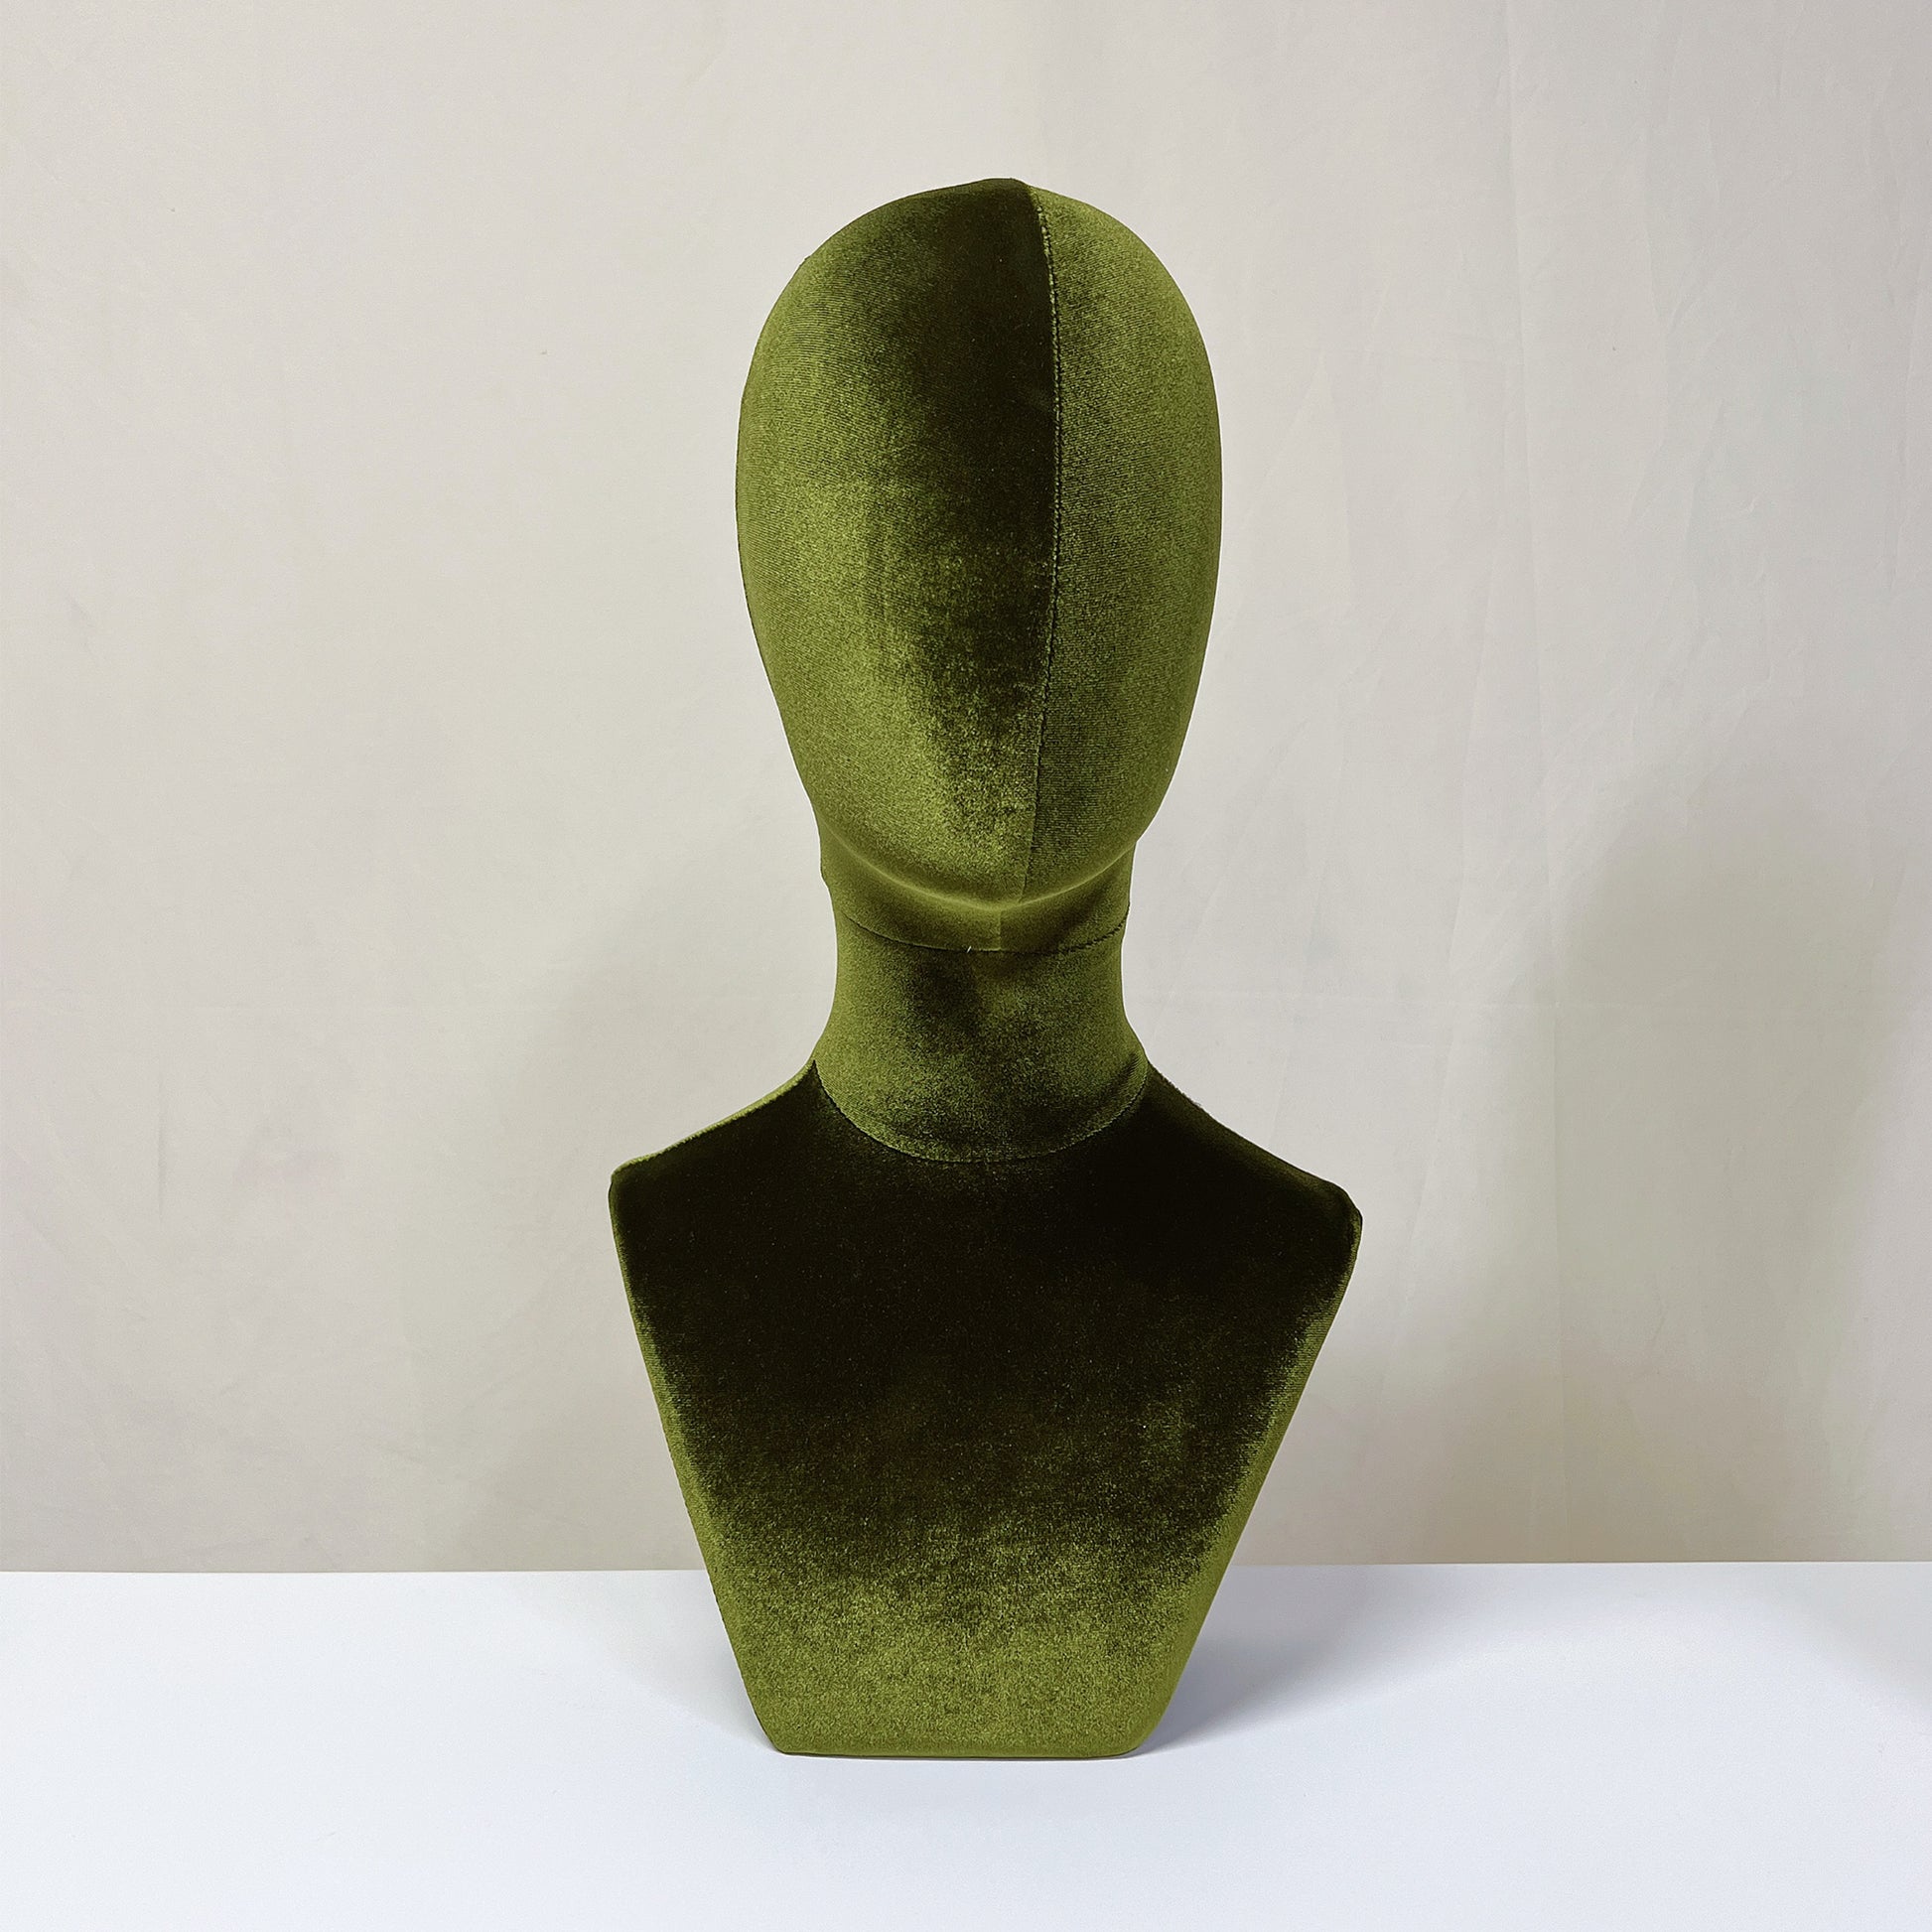 Luxurious Olive-Green Velvet Head Model, Can Pinnable Cloth Head Mannequin, Head Hat Stand/Display, Lace Head Wig Stand, Hat Rack W/ Fabric DE-LIANG